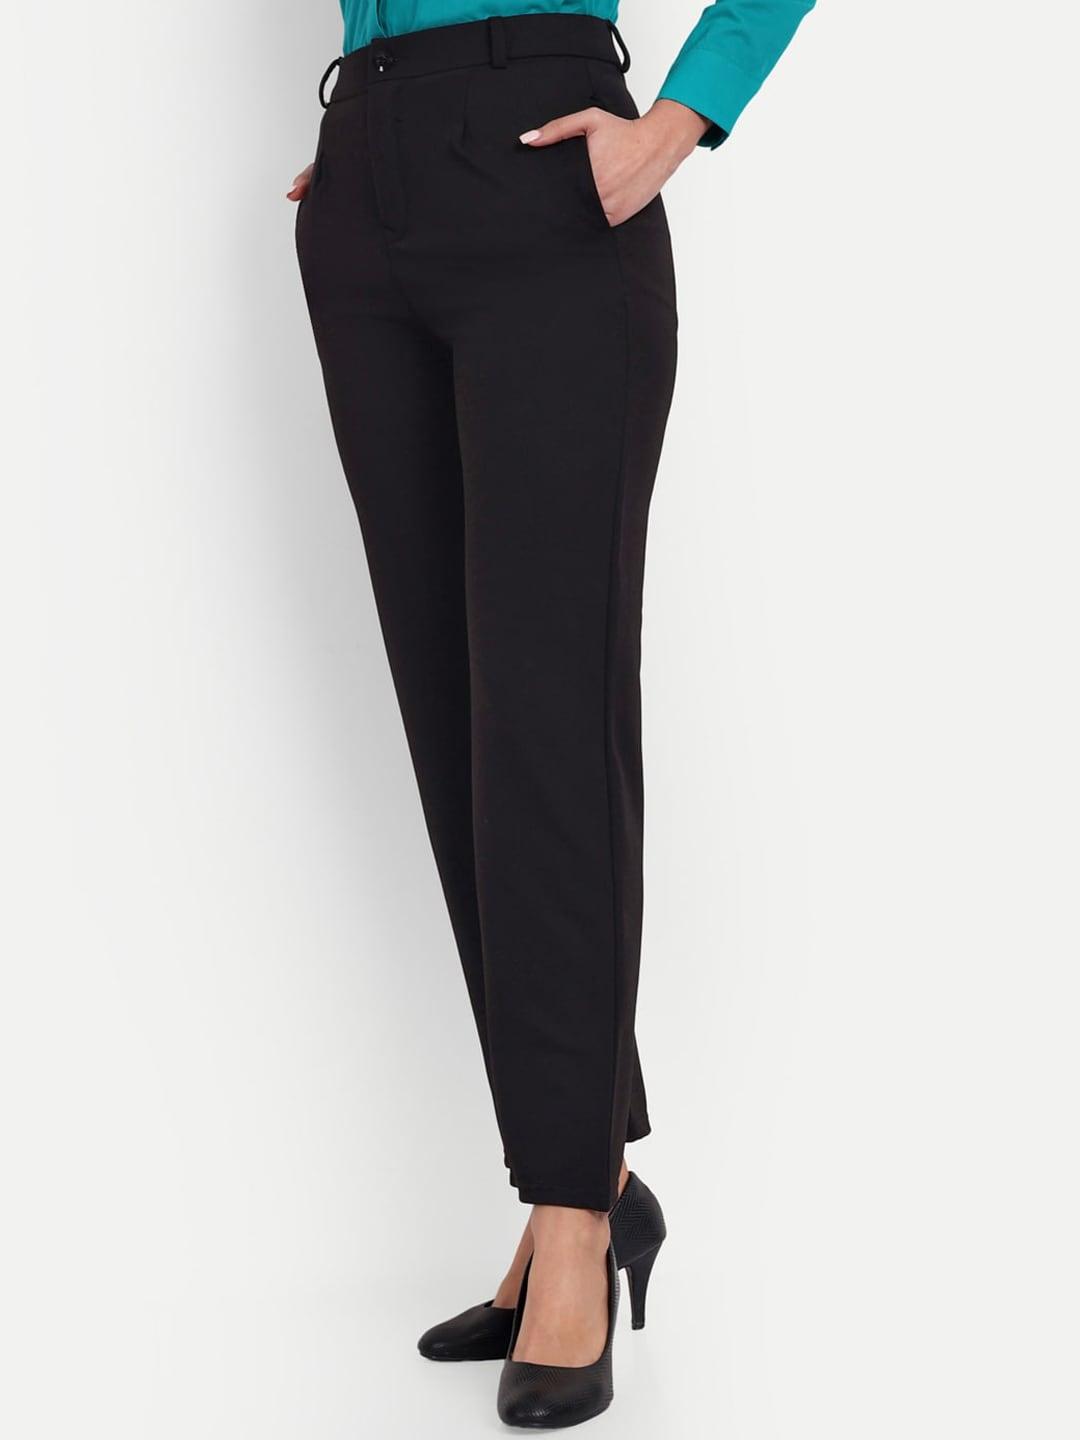 next-one-women-black-classic-straight-fit-high-rise-easy-wash-trousers